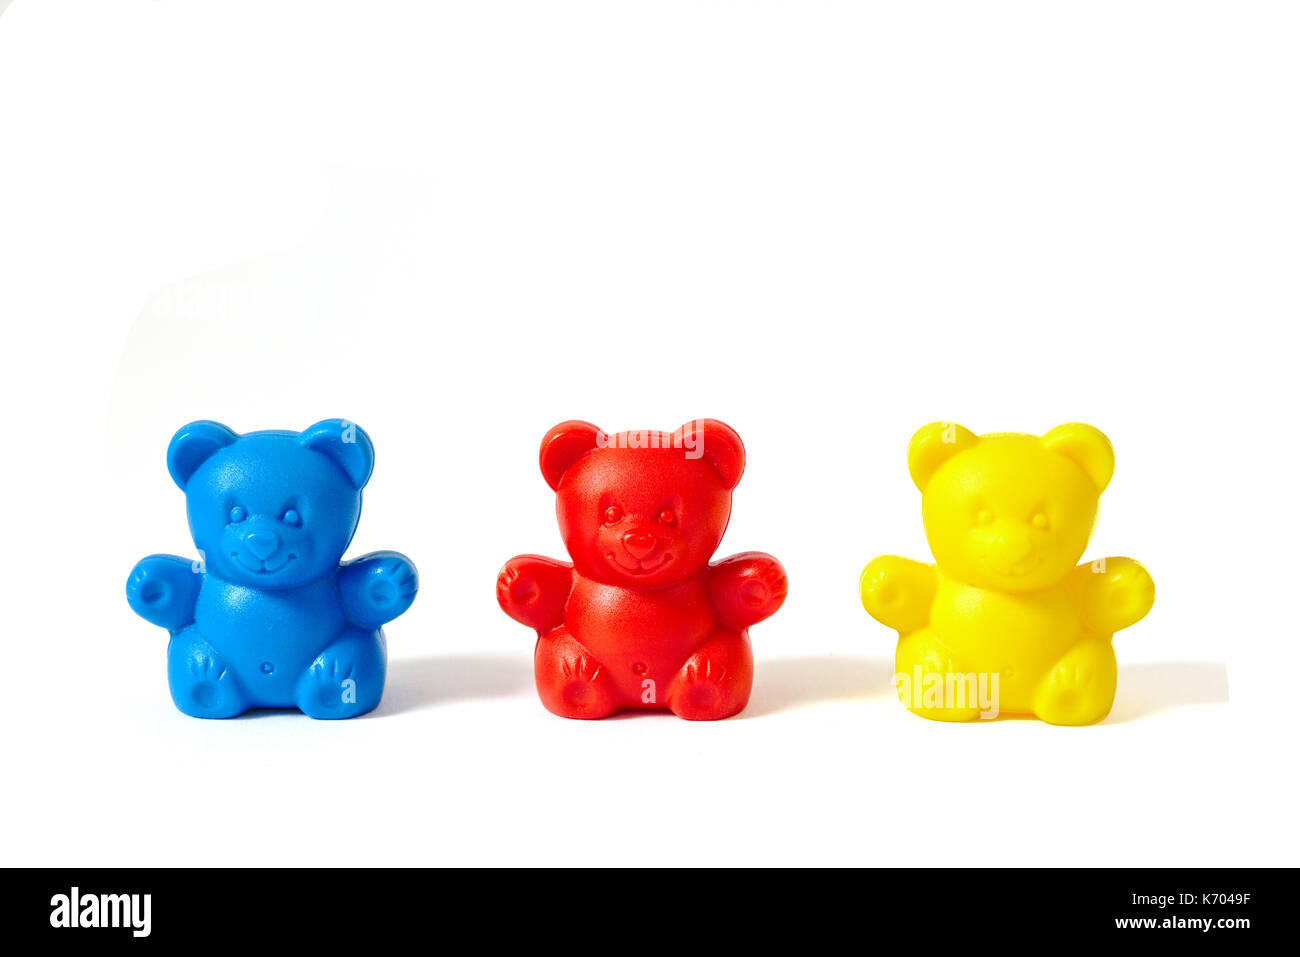 Small blue, red and yellow plastic toy bears isolated on white background Stock Photo